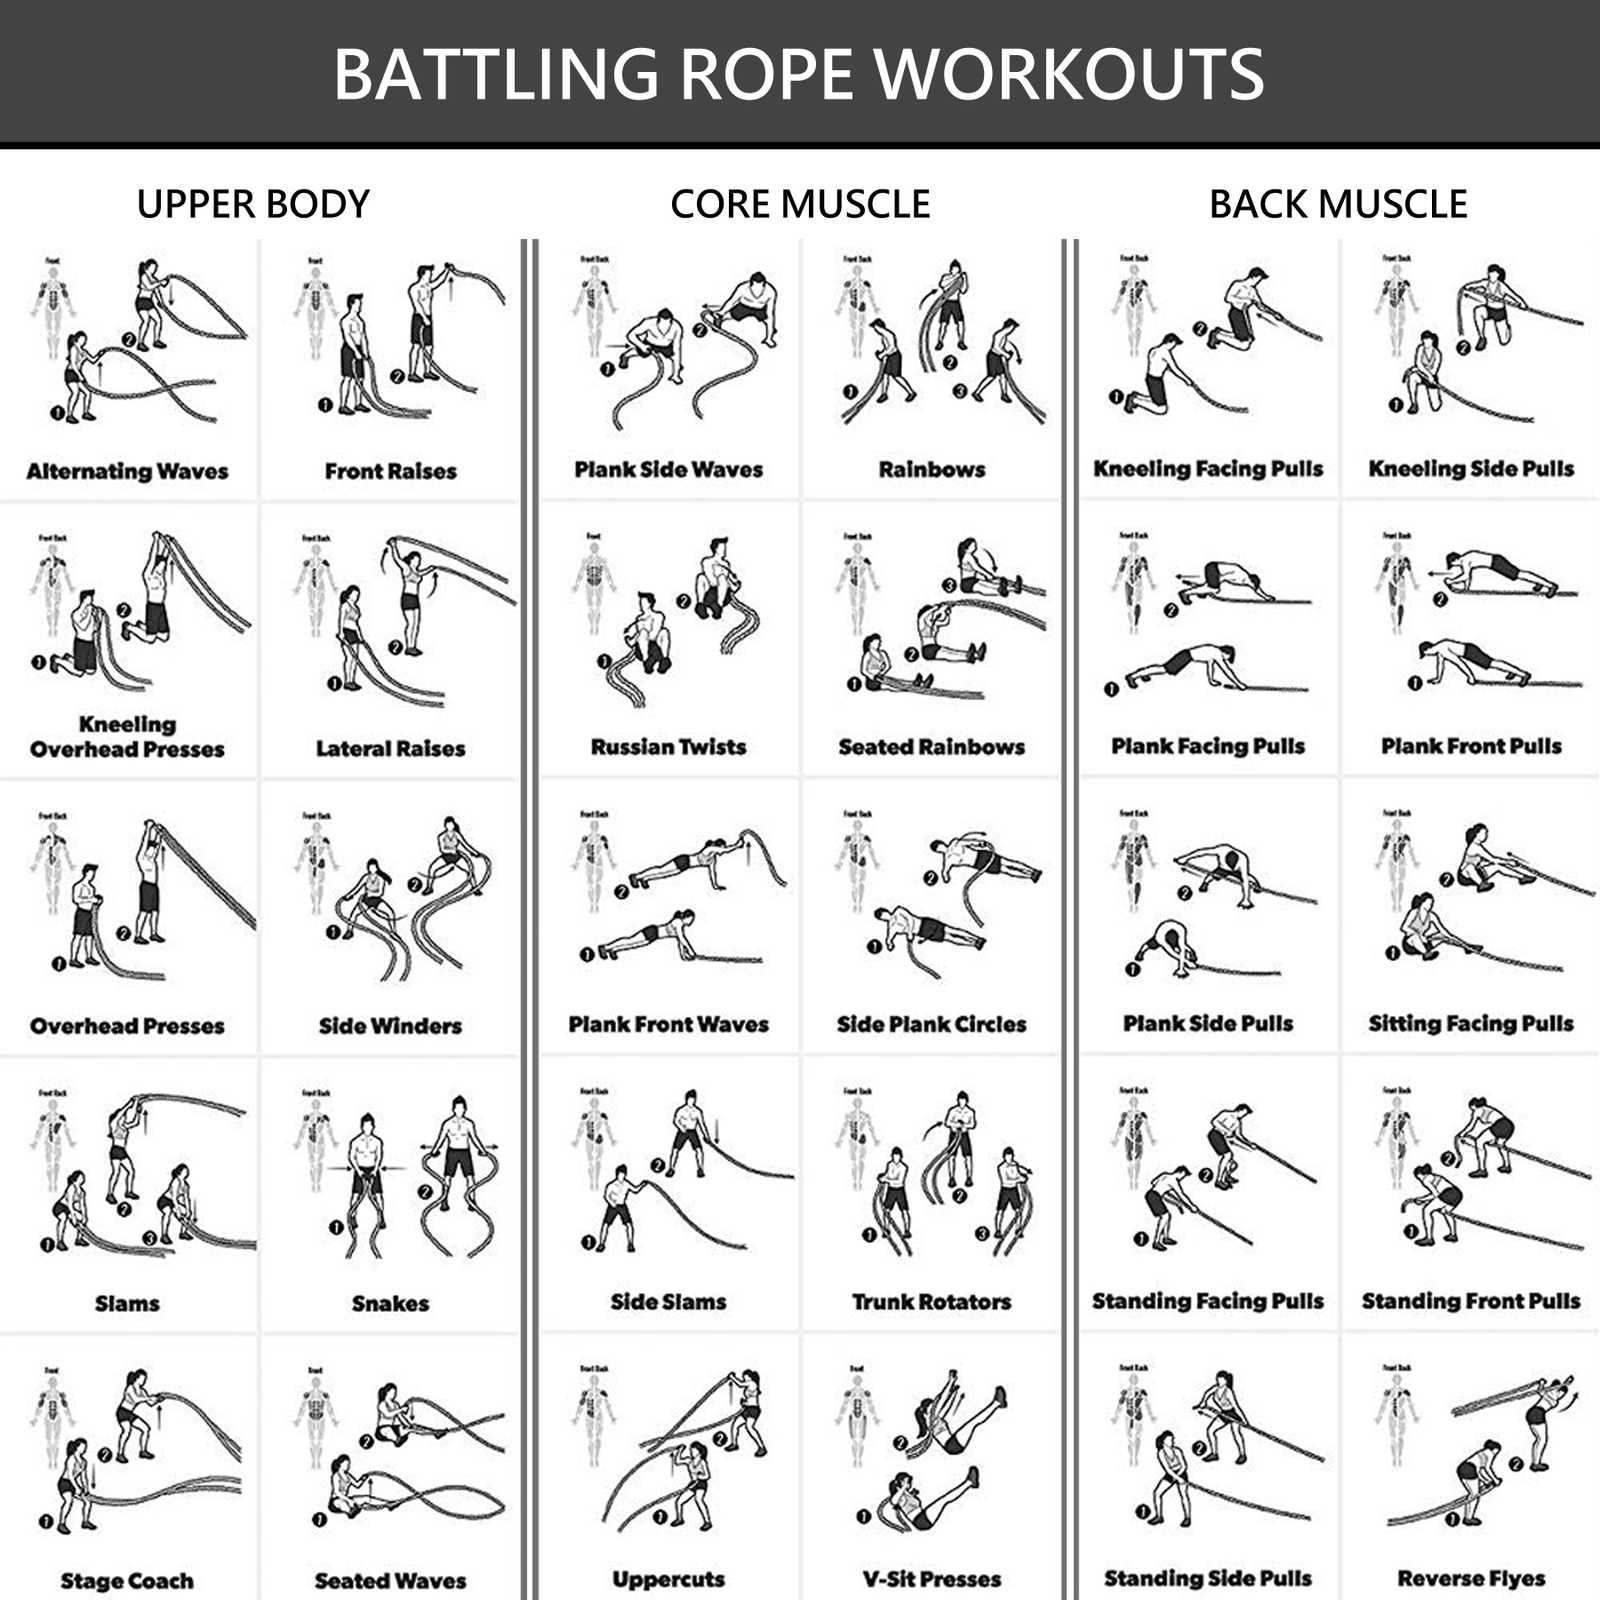  Battle rope and sandbag workout for push your ABS